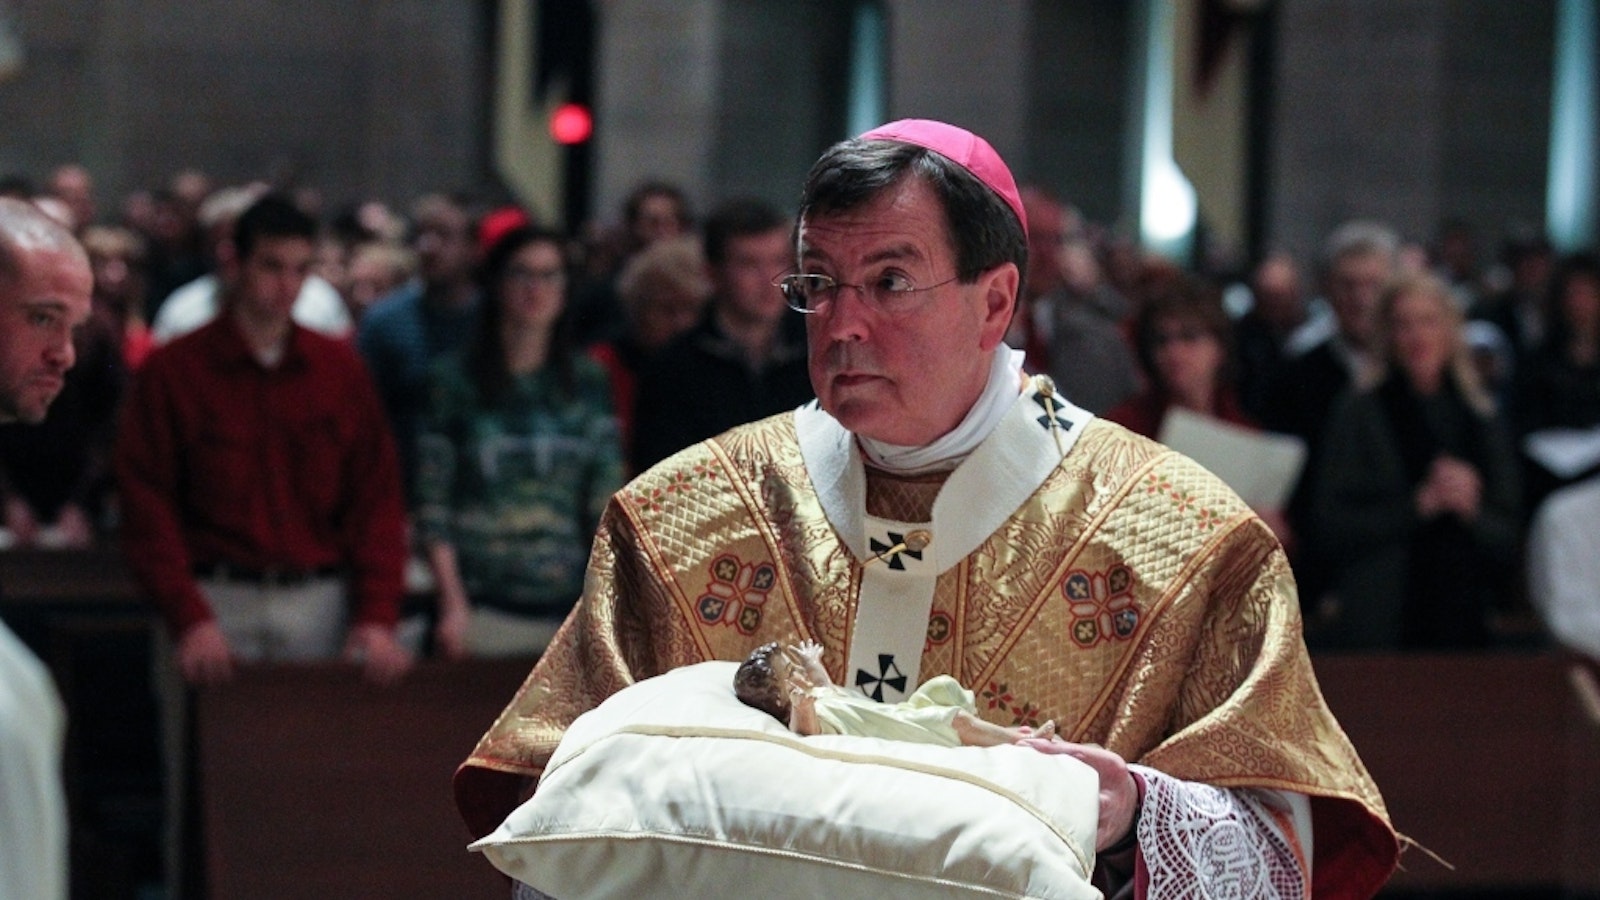 Archbishop Vigneron carries the Christ Child to the manger during Midnight Mass on Christmas Eve, Dec. 24, 2012, at the Cathedral of the Most Blessed Sacrament. (Larry A. Peplin | Detroit Catholic file photo)